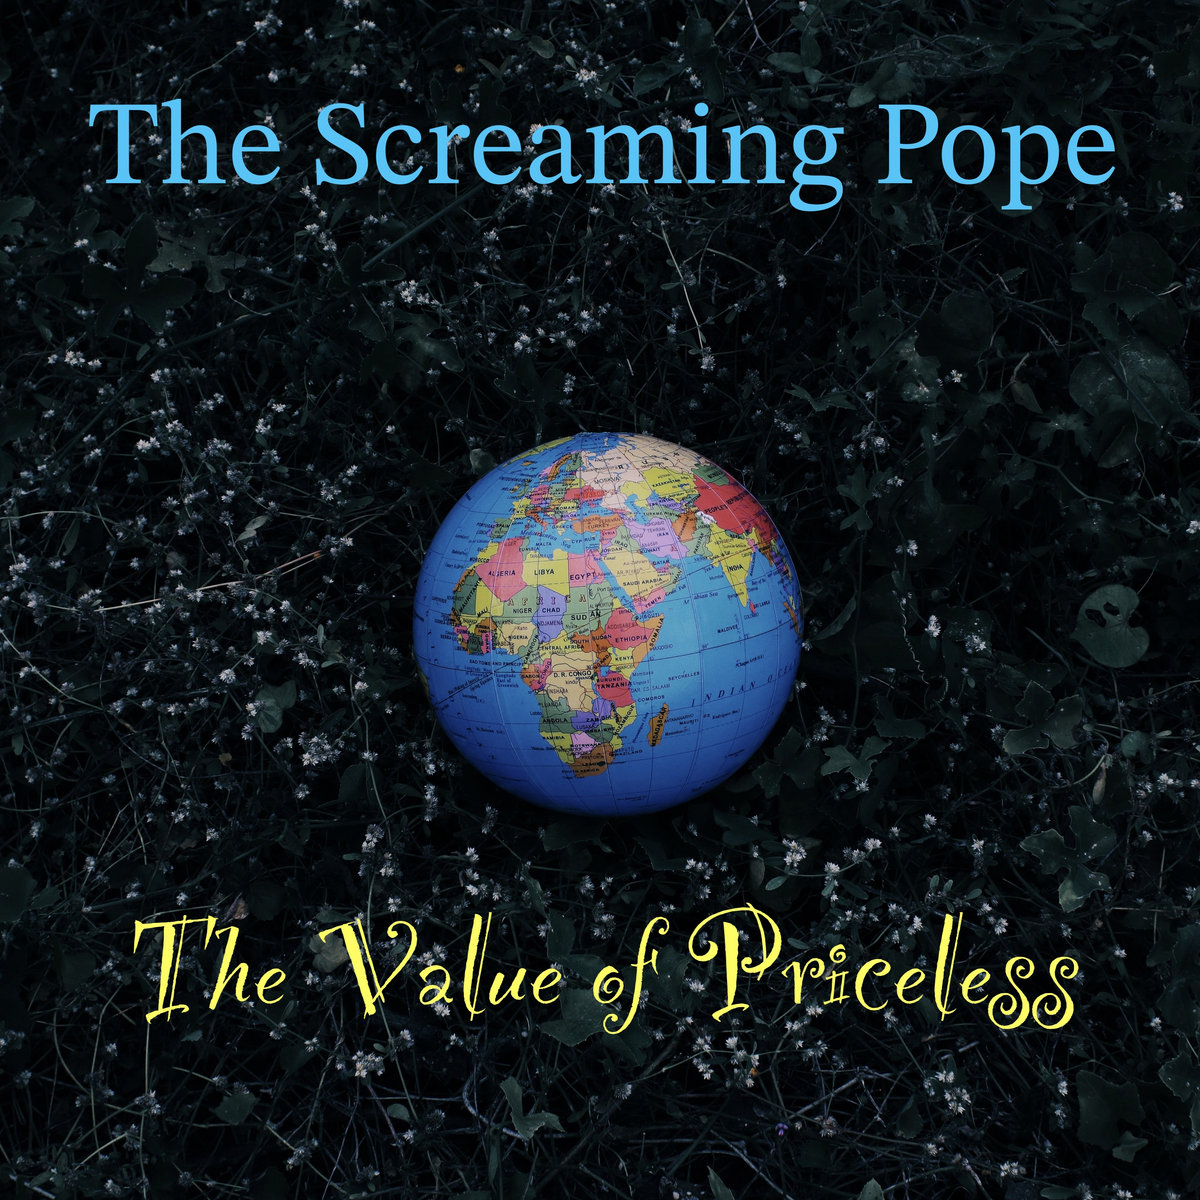 Listen to the album 'The Value Of Priceless' and get a special aesthetic pleasure from The Screaming Pope new work. #indiedockmusicblog #electronic indiedockmusicblog.co.uk/?p=23780